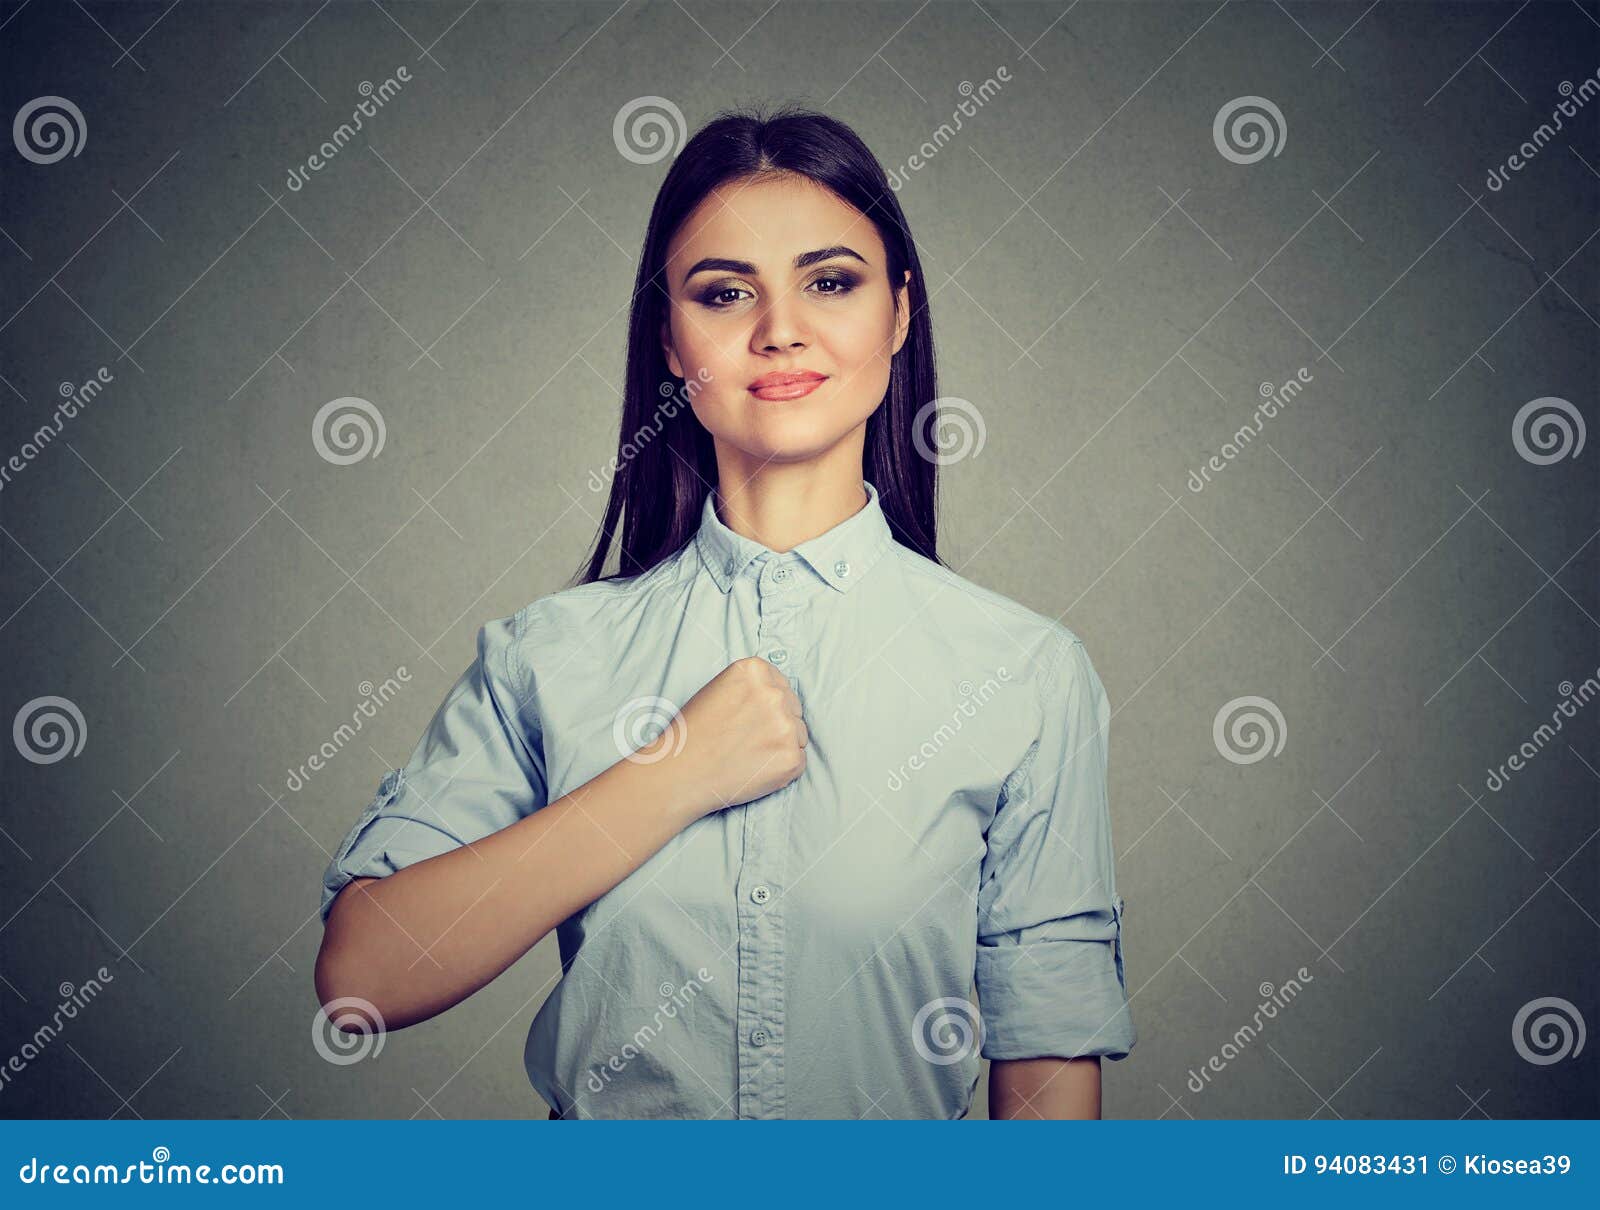 confident young woman  on gray wall background